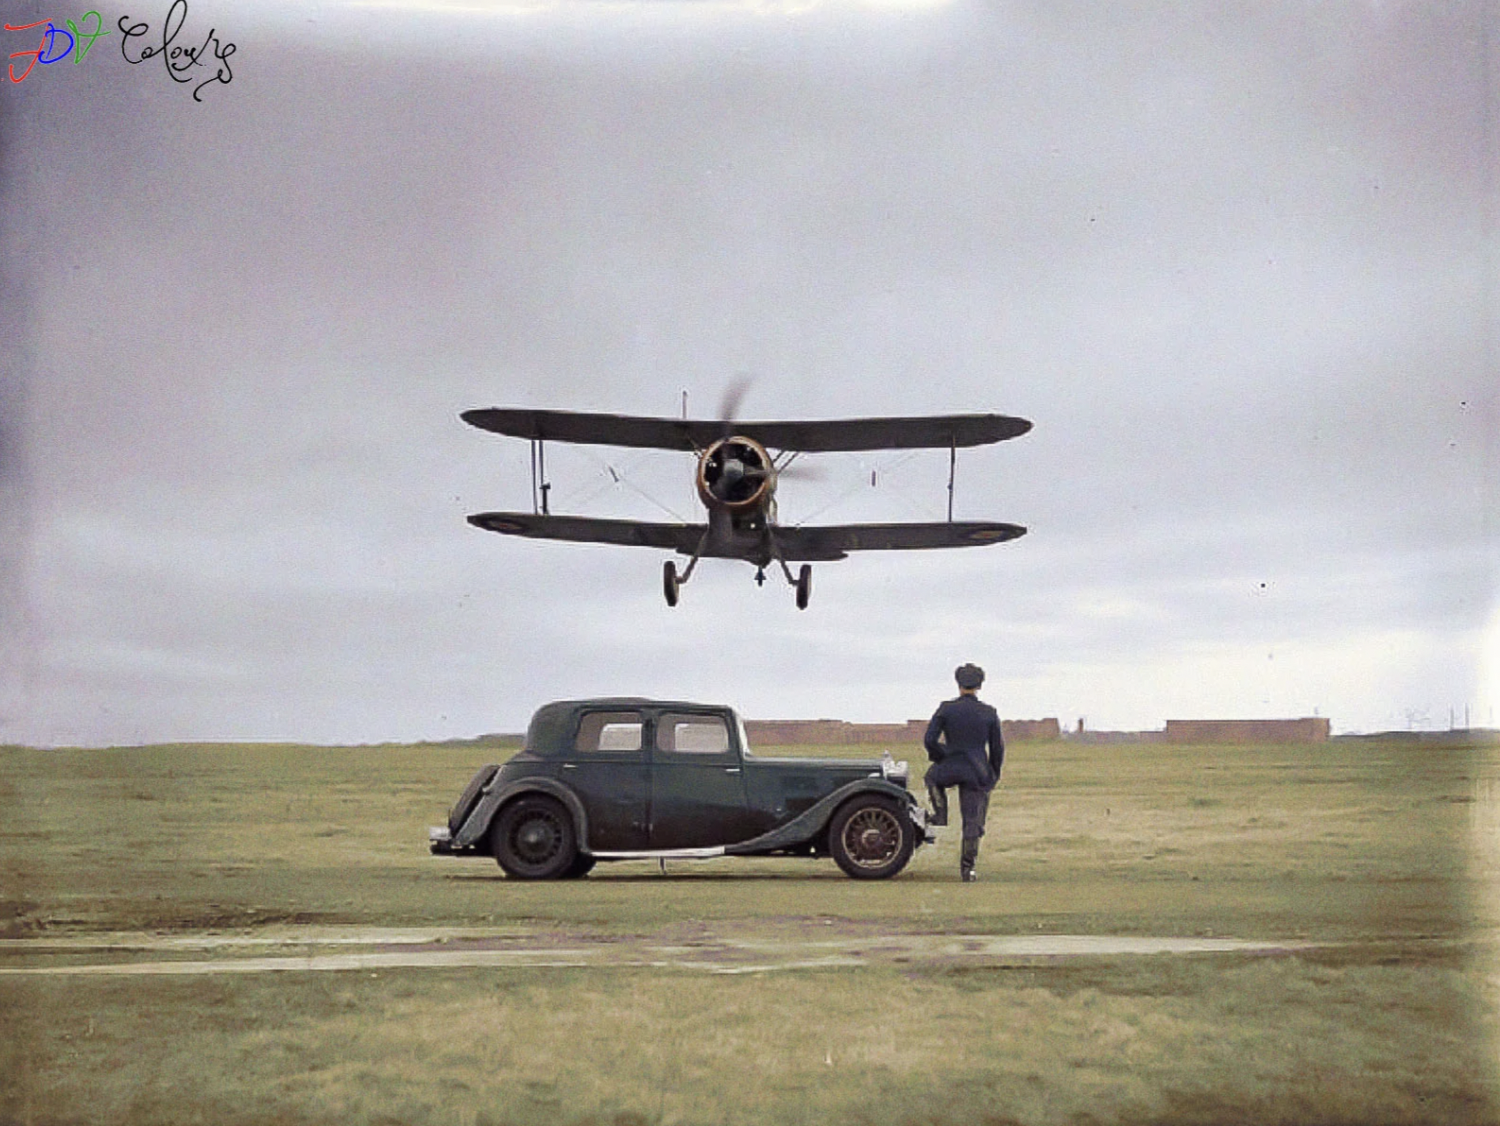 A Gloster Gladiator takes off over a Triumph Gloria, colorized, during the second world war.